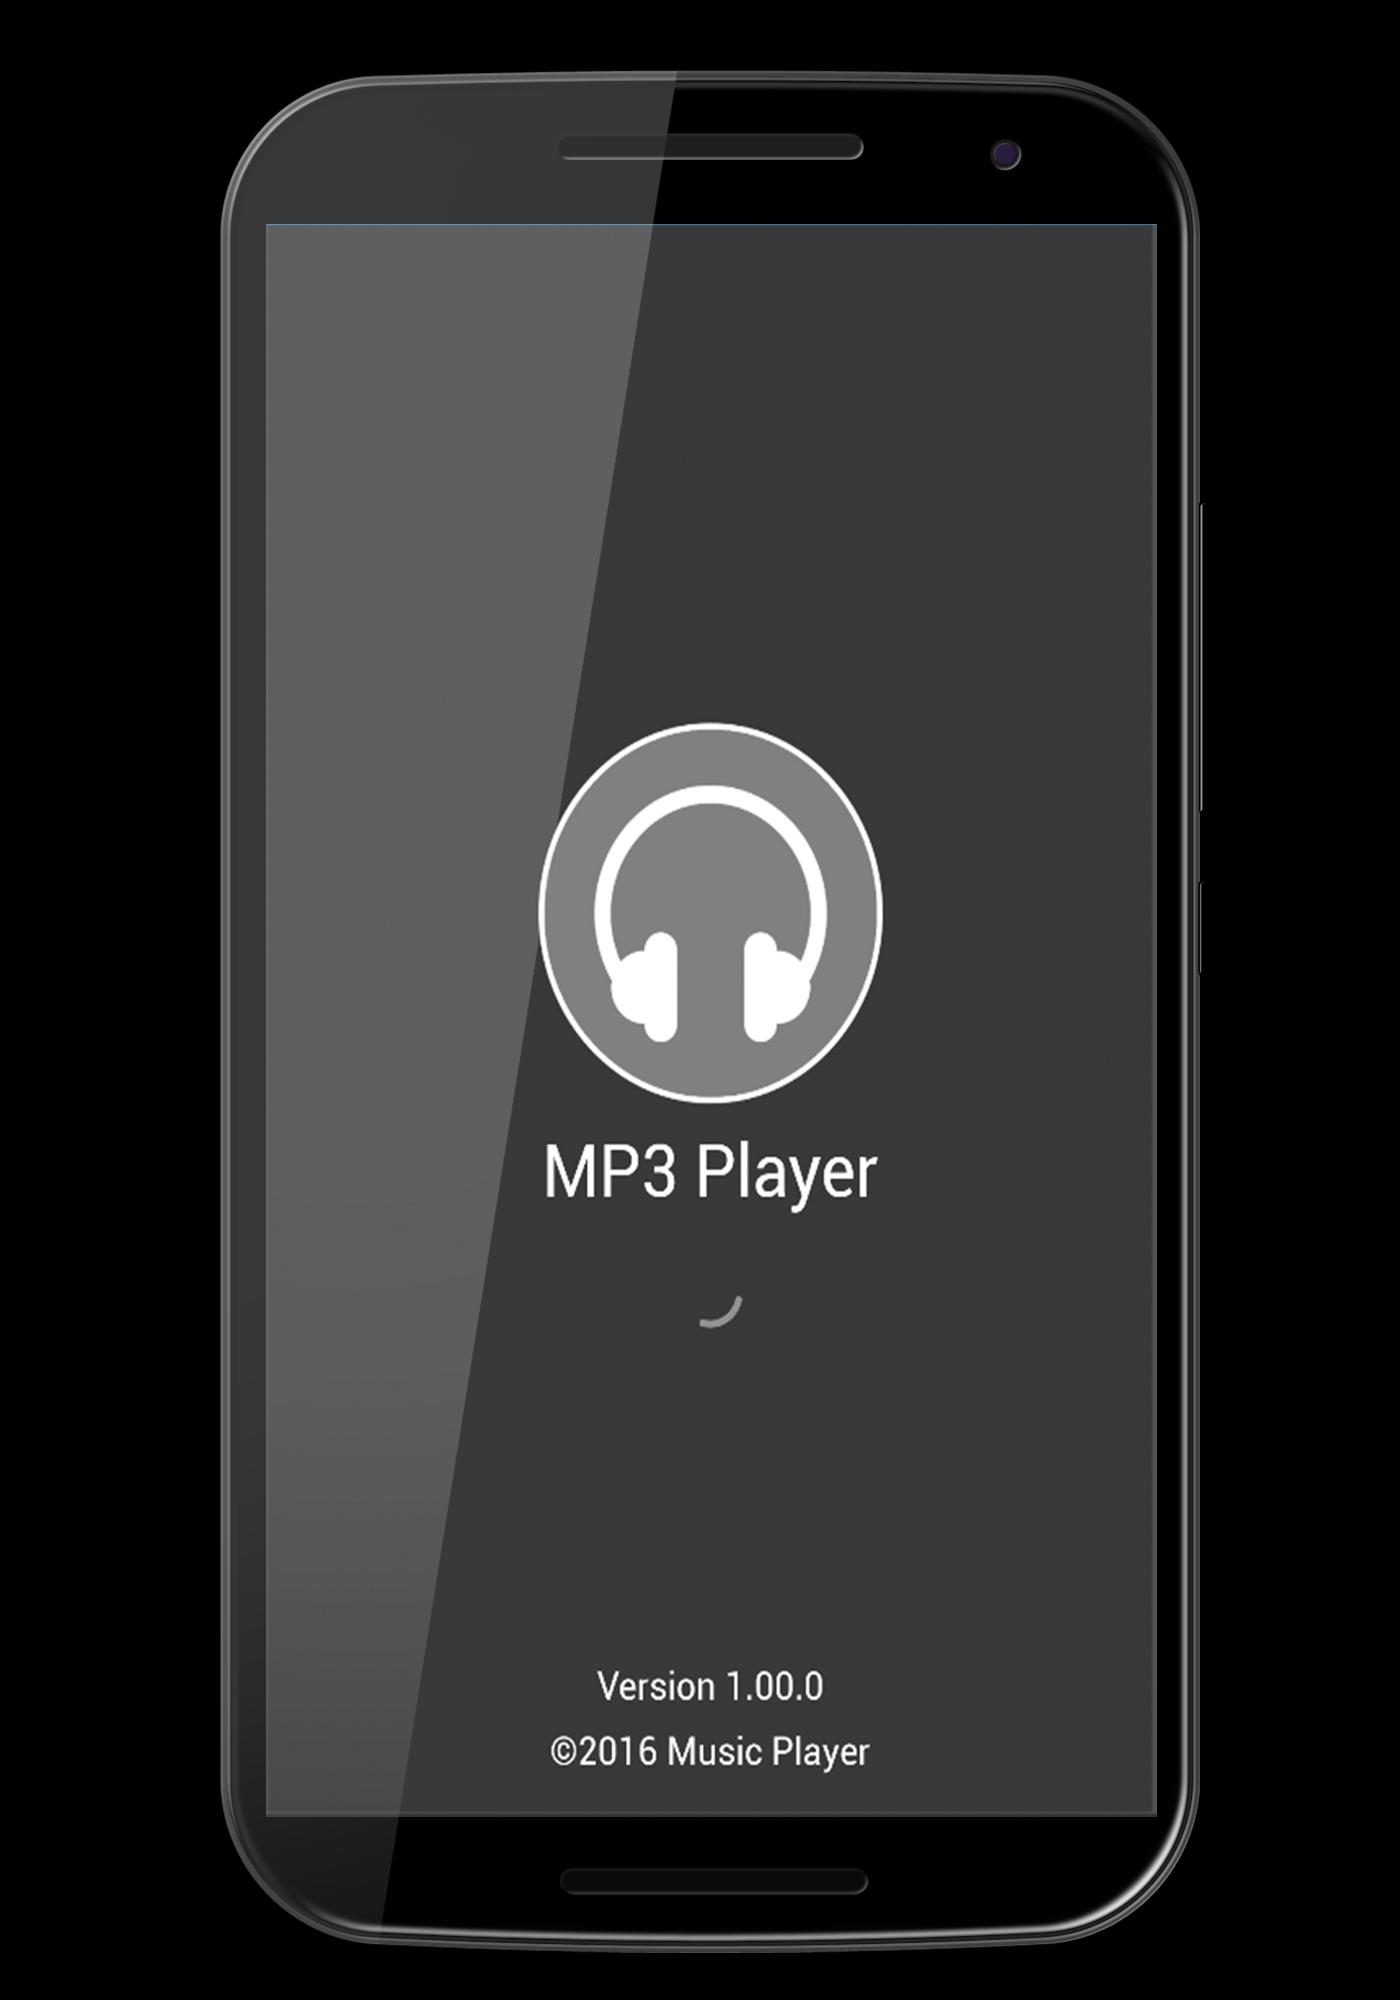 MP3 PLAYER - TUBEMATE for Android - APK Download